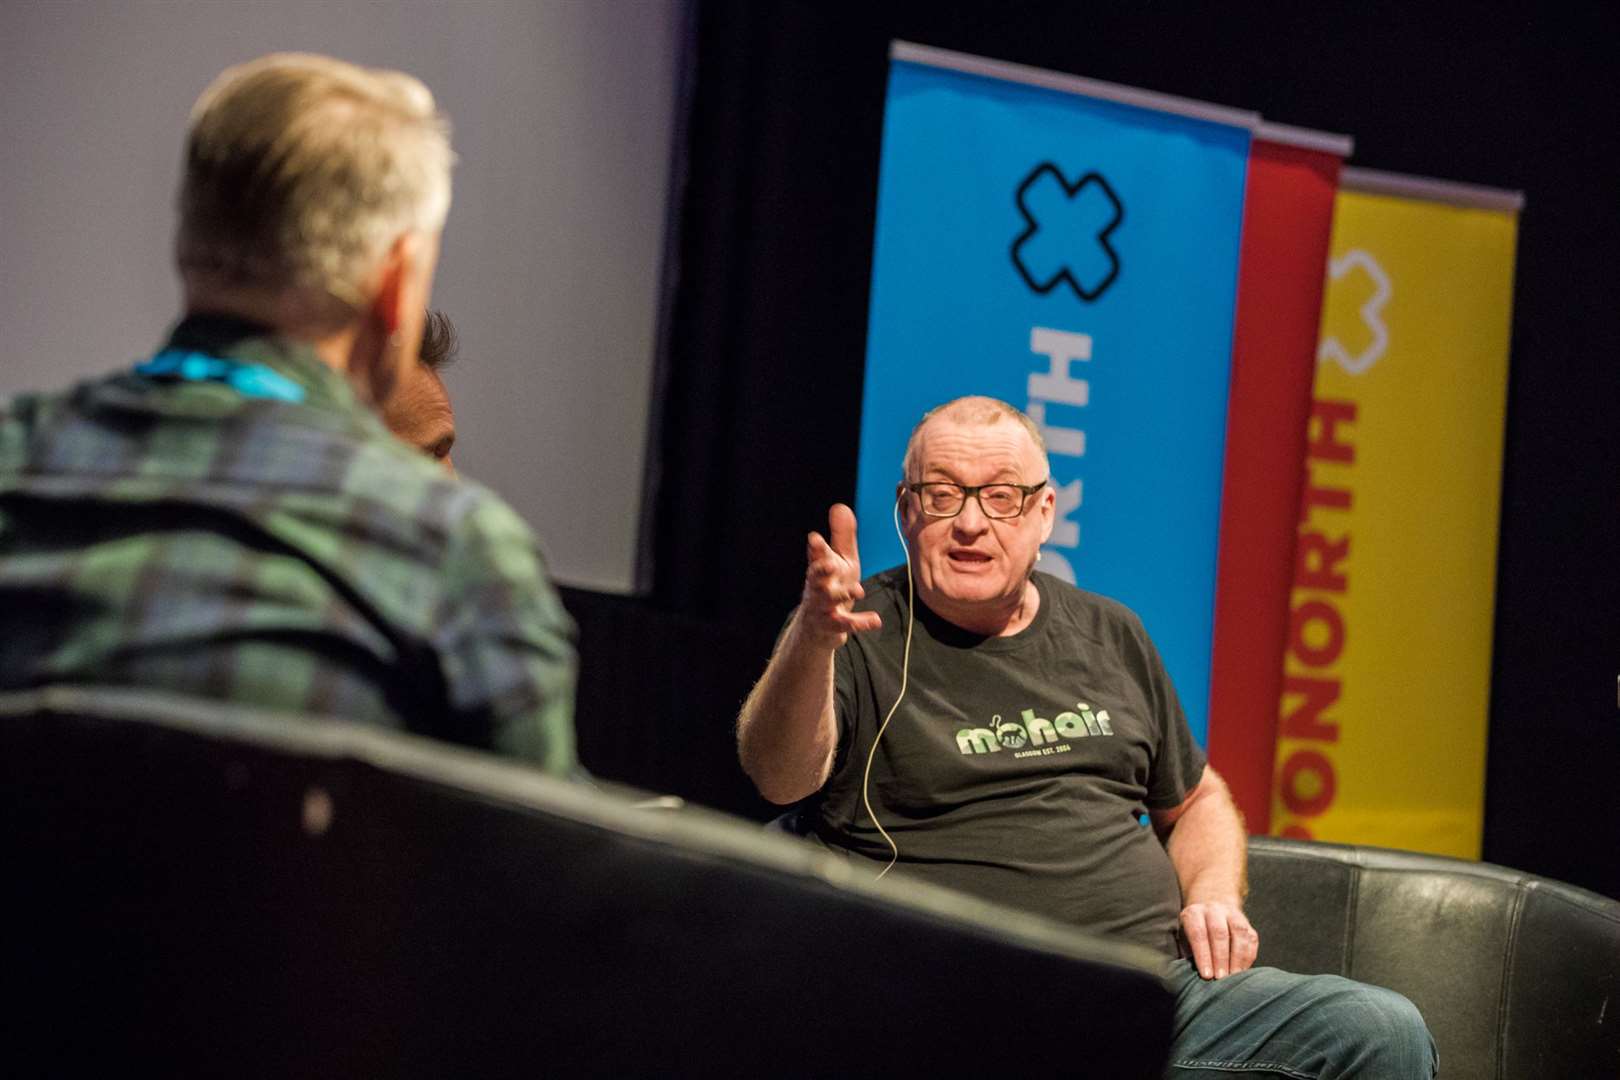 BBC broadcaster and music writer Stuart Cosgrove (right), on a panel talking about music writing and growing up in small towns with fellow broadcaster and writer Vic Galloway at XpoNorth in 2019. Picture: Paul Campbell/XPONorth